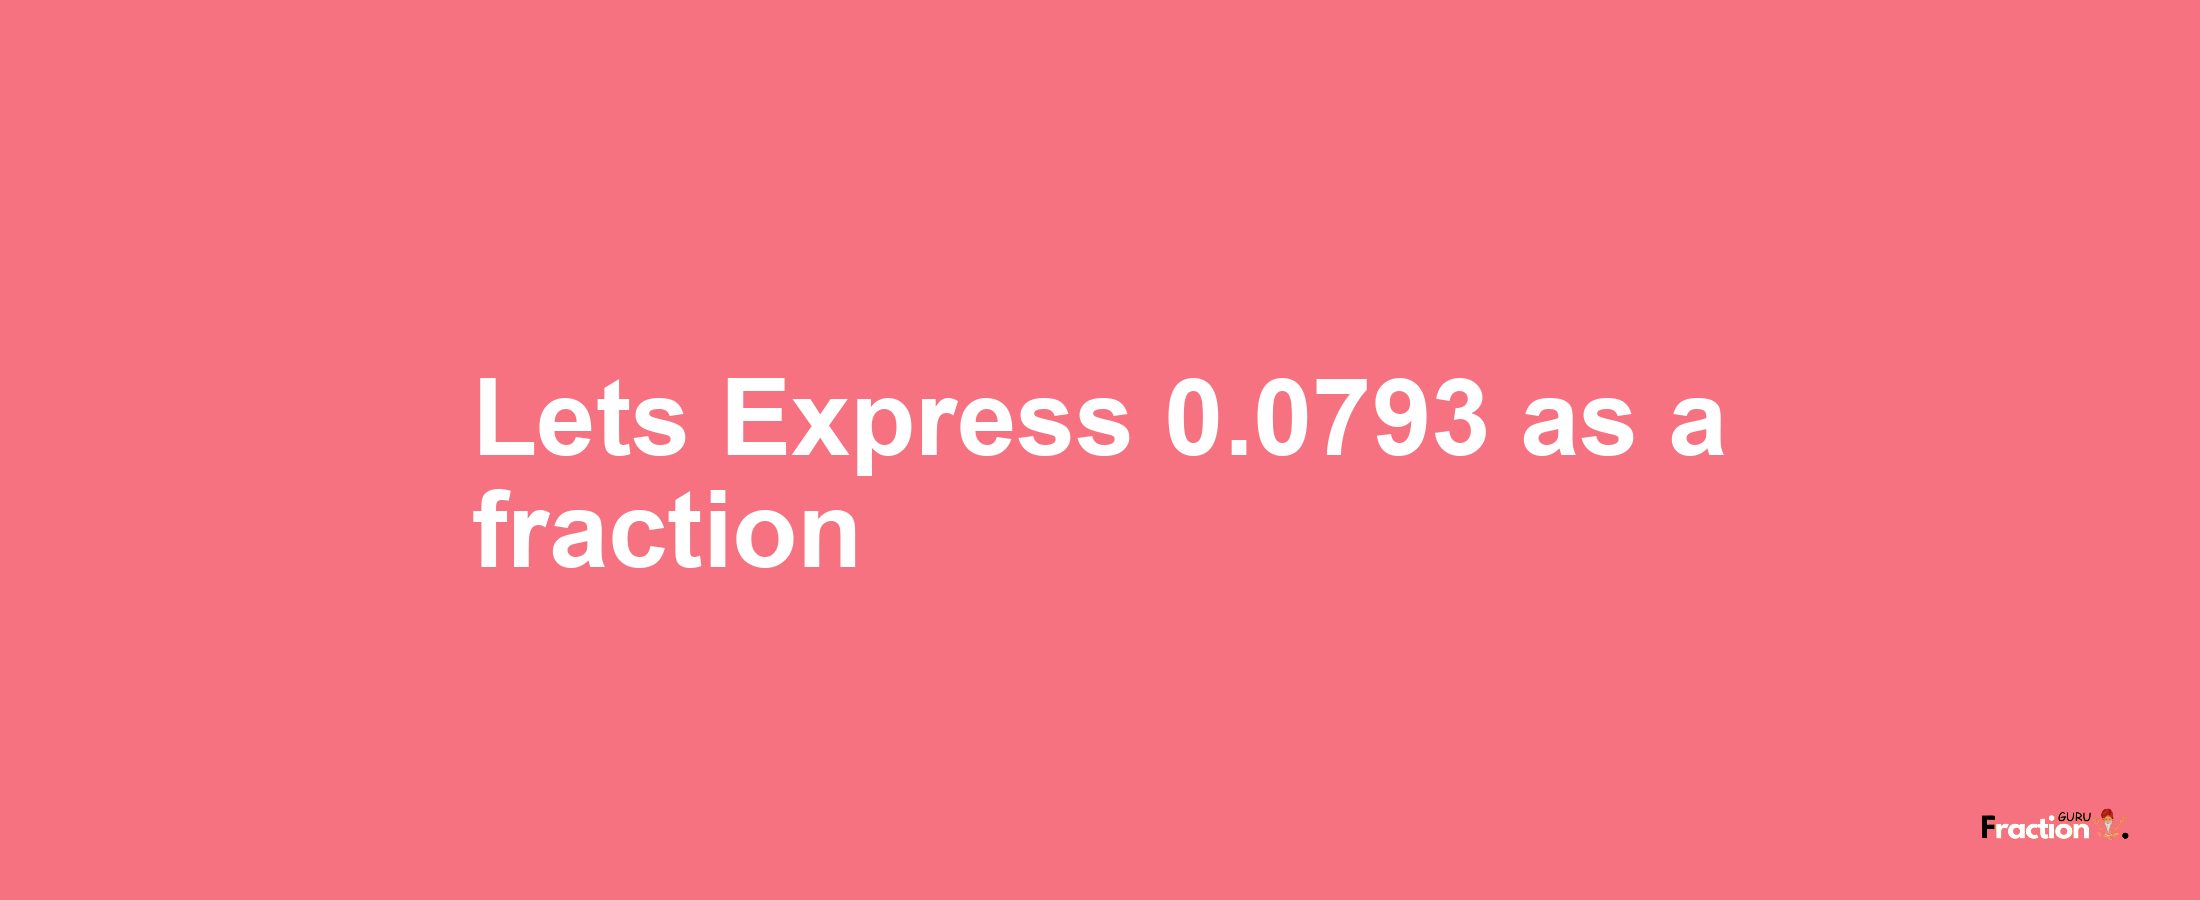 Lets Express 0.0793 as afraction